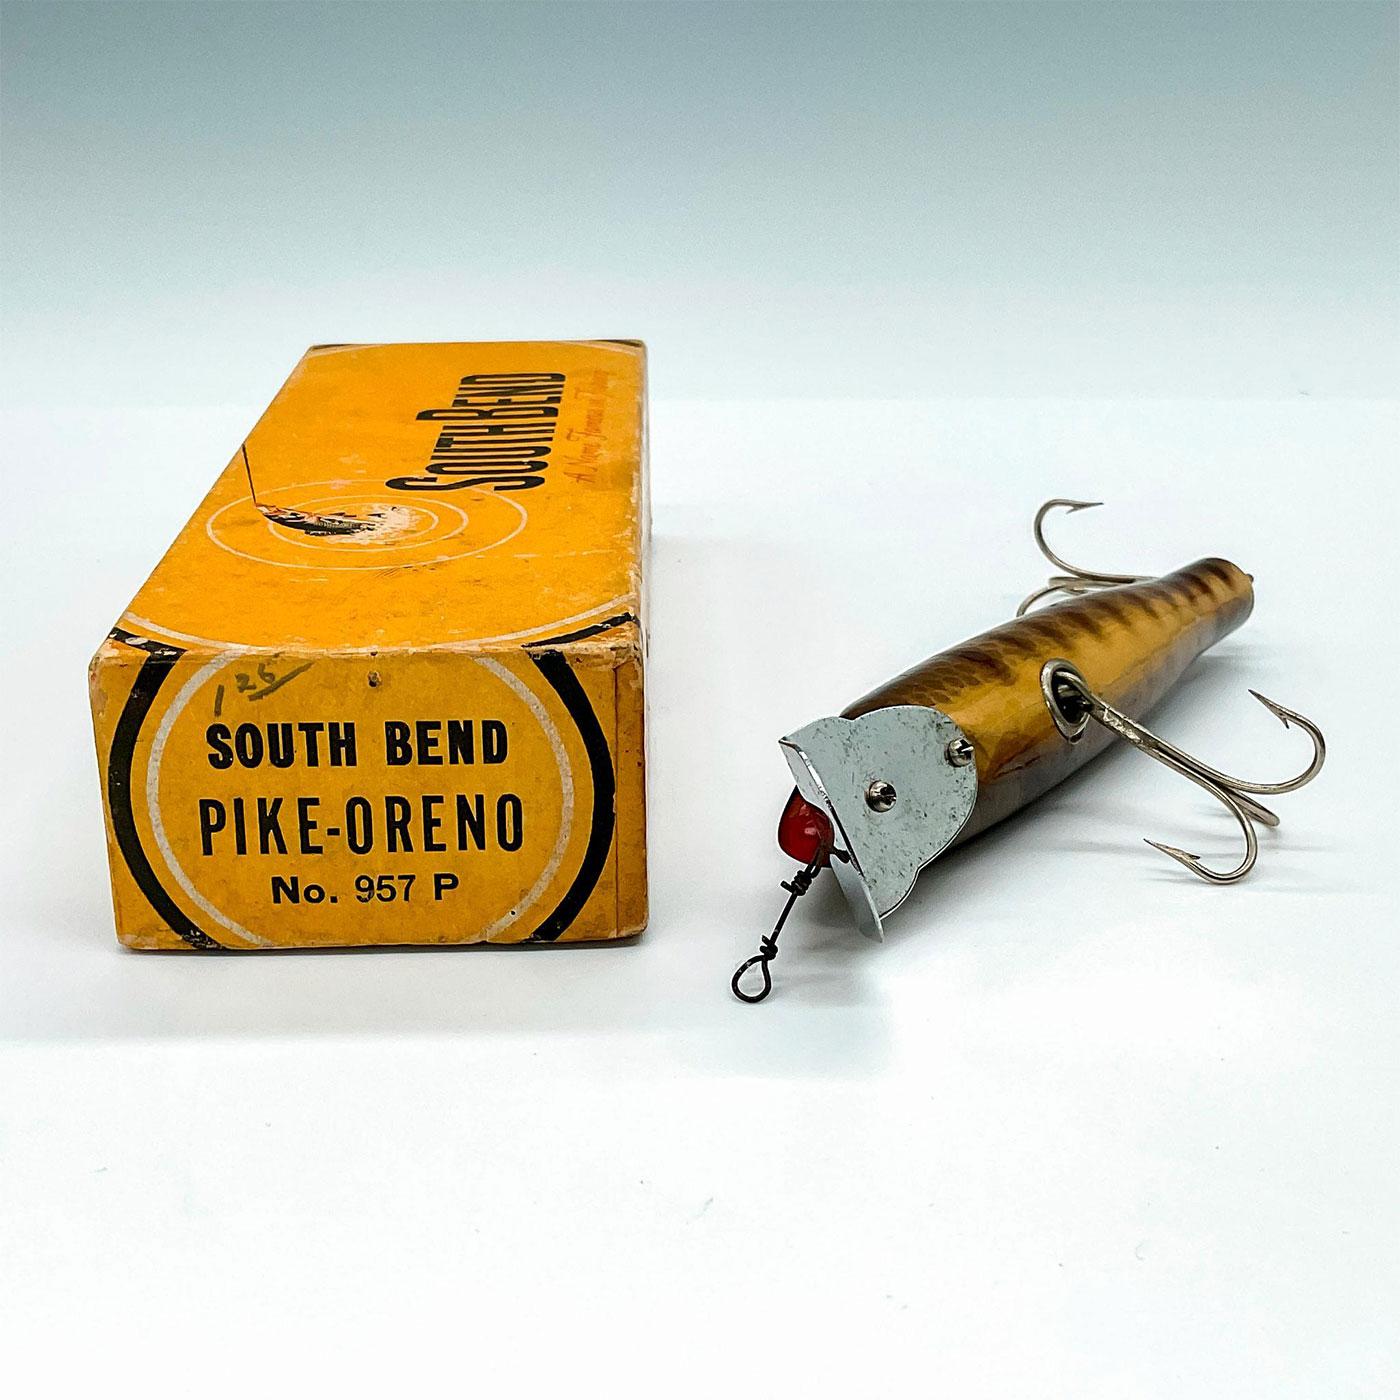 Vintage South Bend Pike-Oreno in Pikie Finish with Box